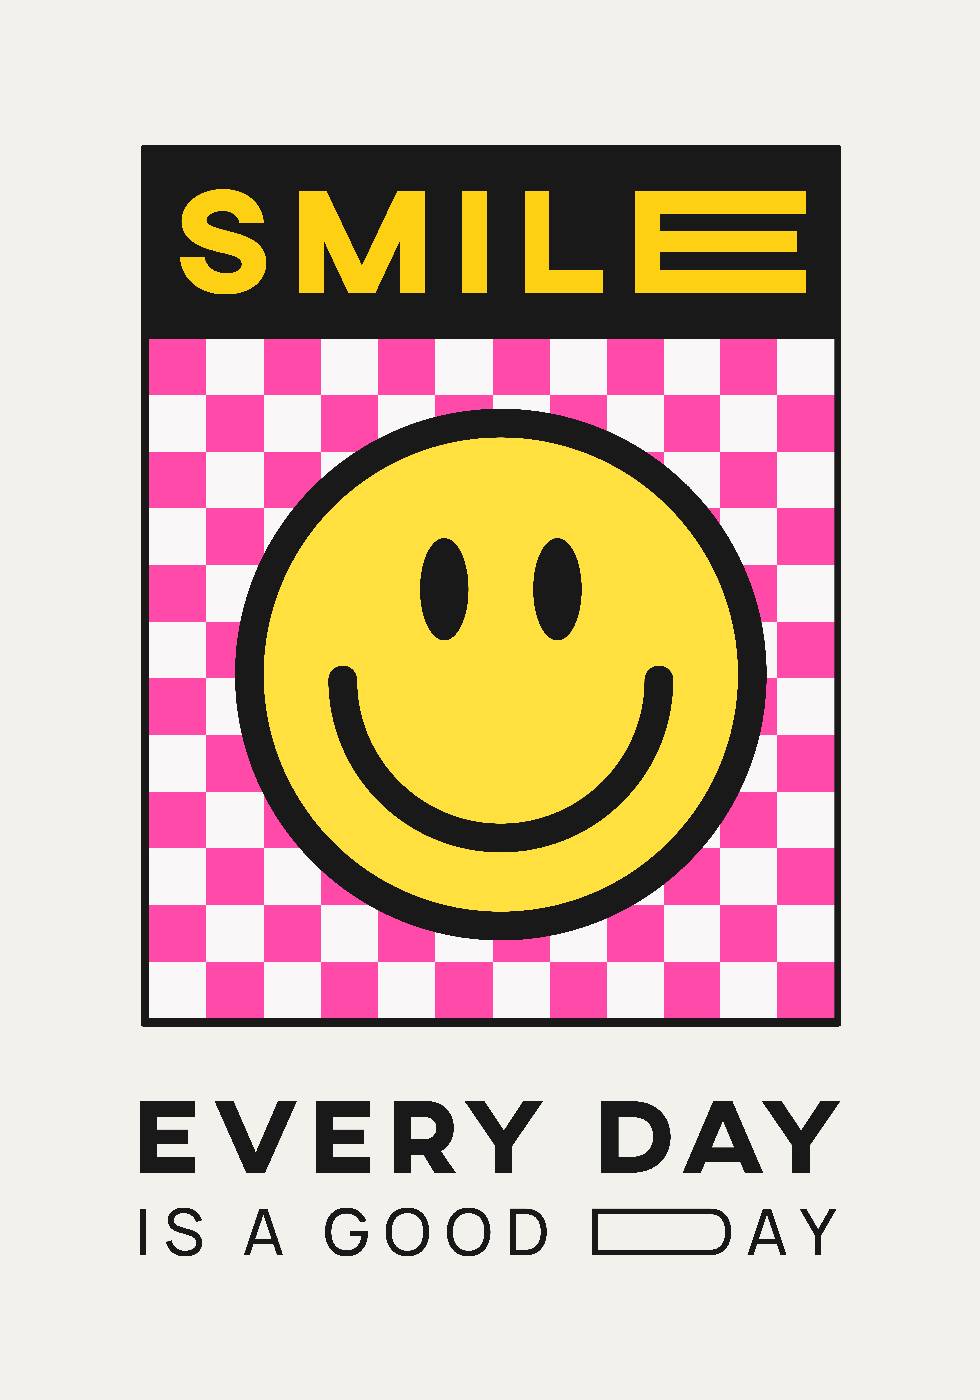 Smiley Yellow and Black Poster